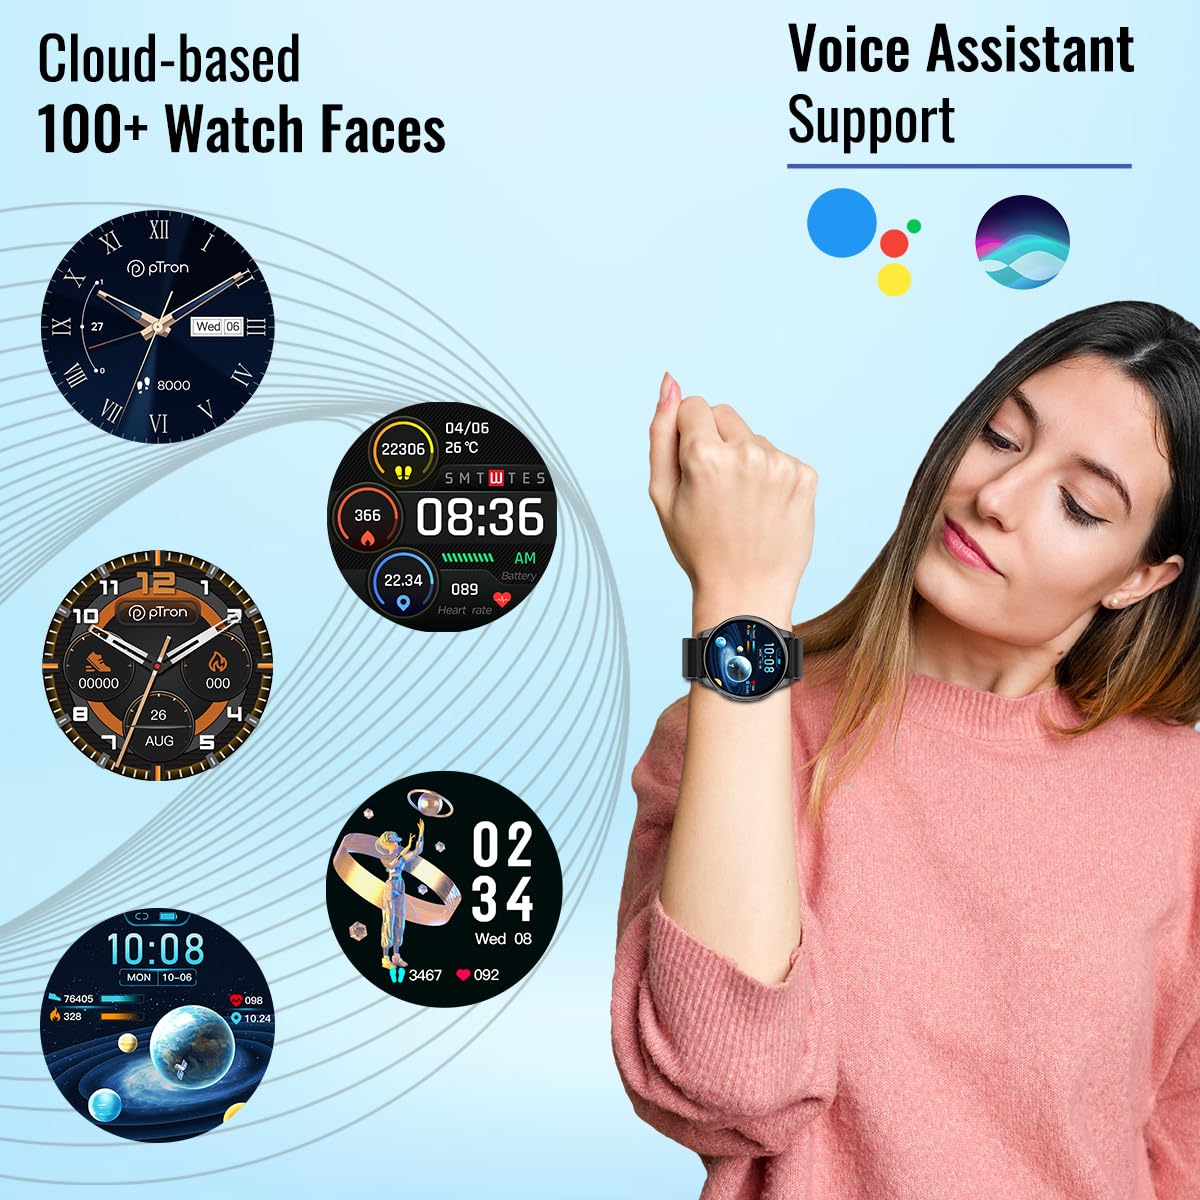 pTron Newly Launched Reflect Flash 1.32 inch Round Smartwatch, Bluetooth Calling, Full Touch Display, 600 NITS, Metal Frame, 100+ Watch Faces, HR, SpO2, Voice Assist & 5 Days Battery Life (Black)